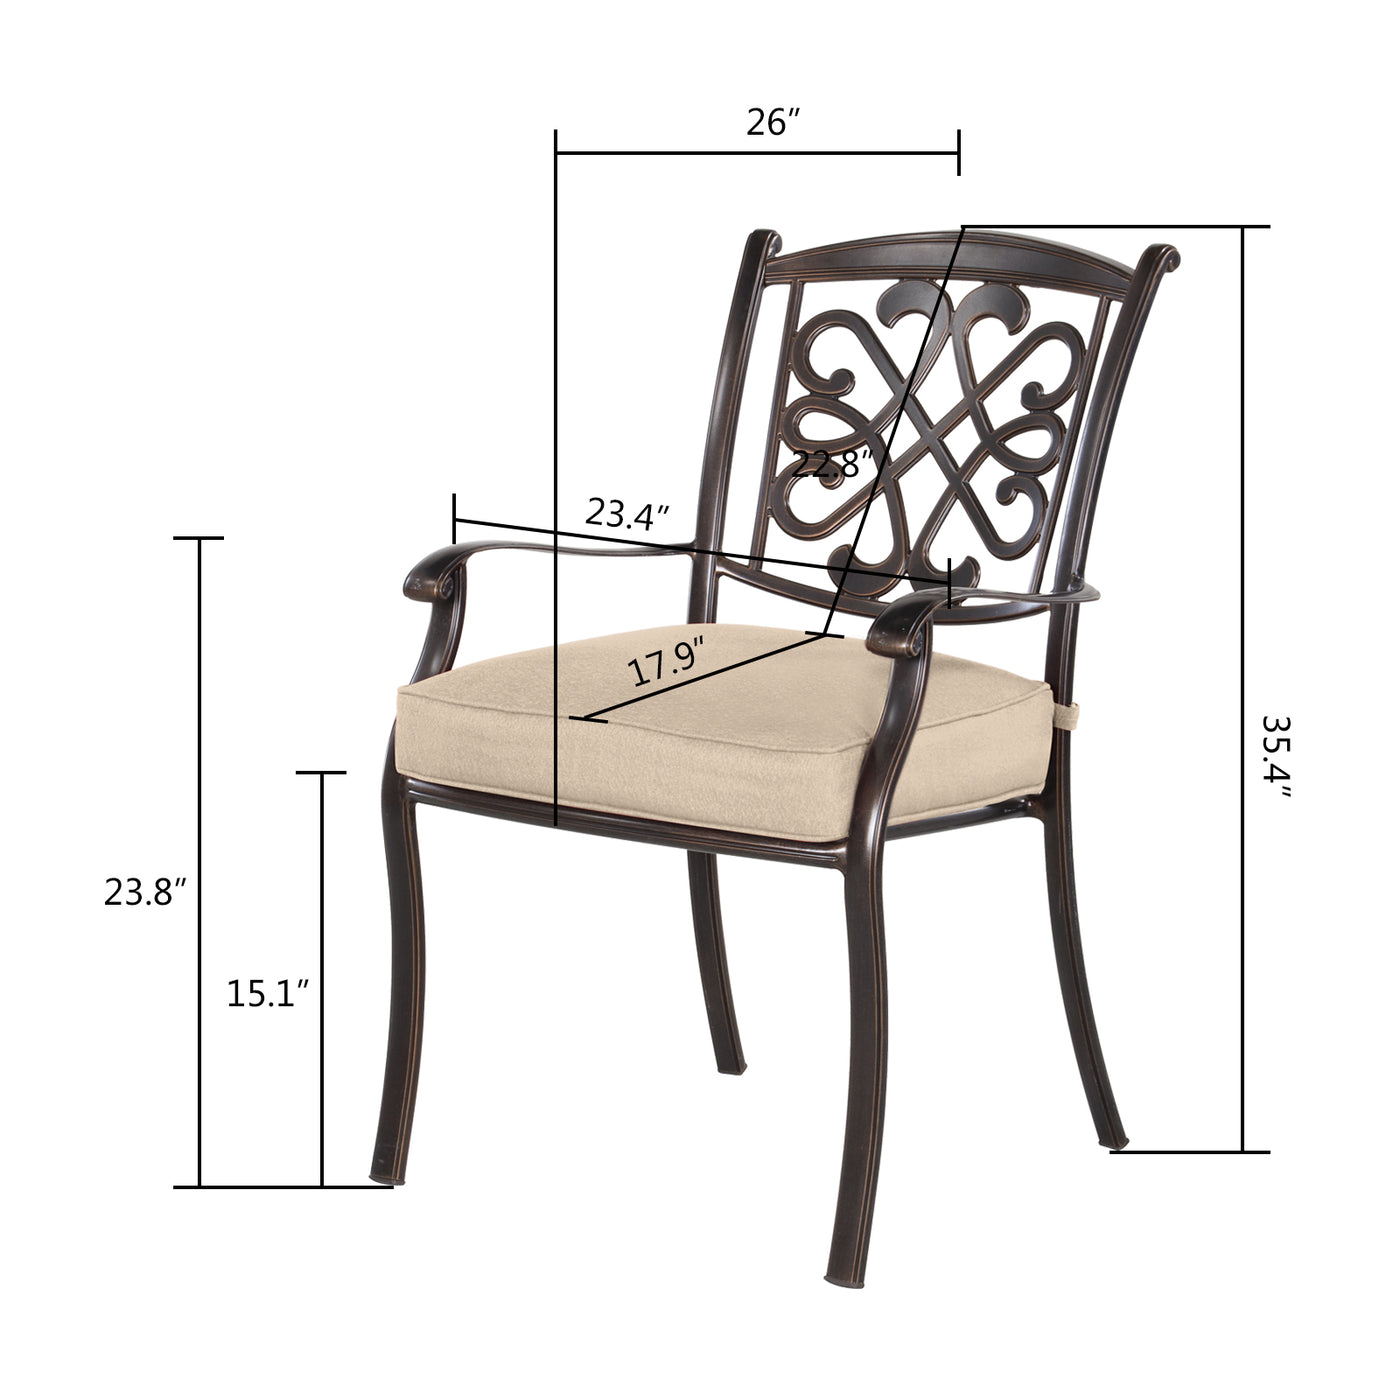 4PCS Patio Outdoor Aluminum Dining Chairs with Cushions, All Weather Stackable